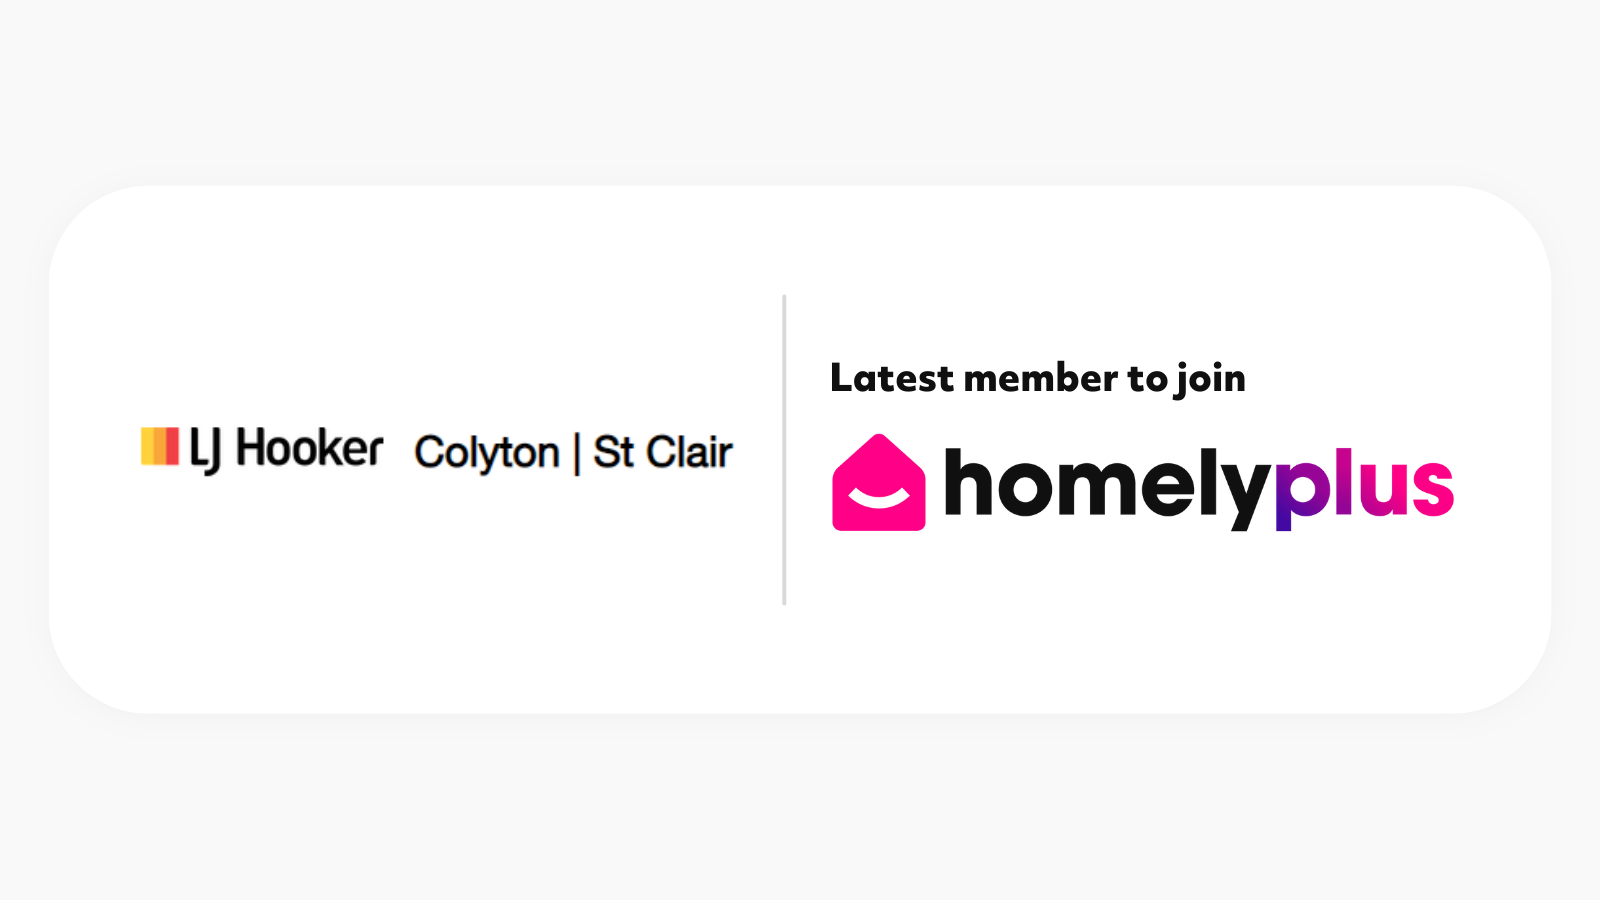 LJ Hooker Colyton | St Clair joins Homely Plus